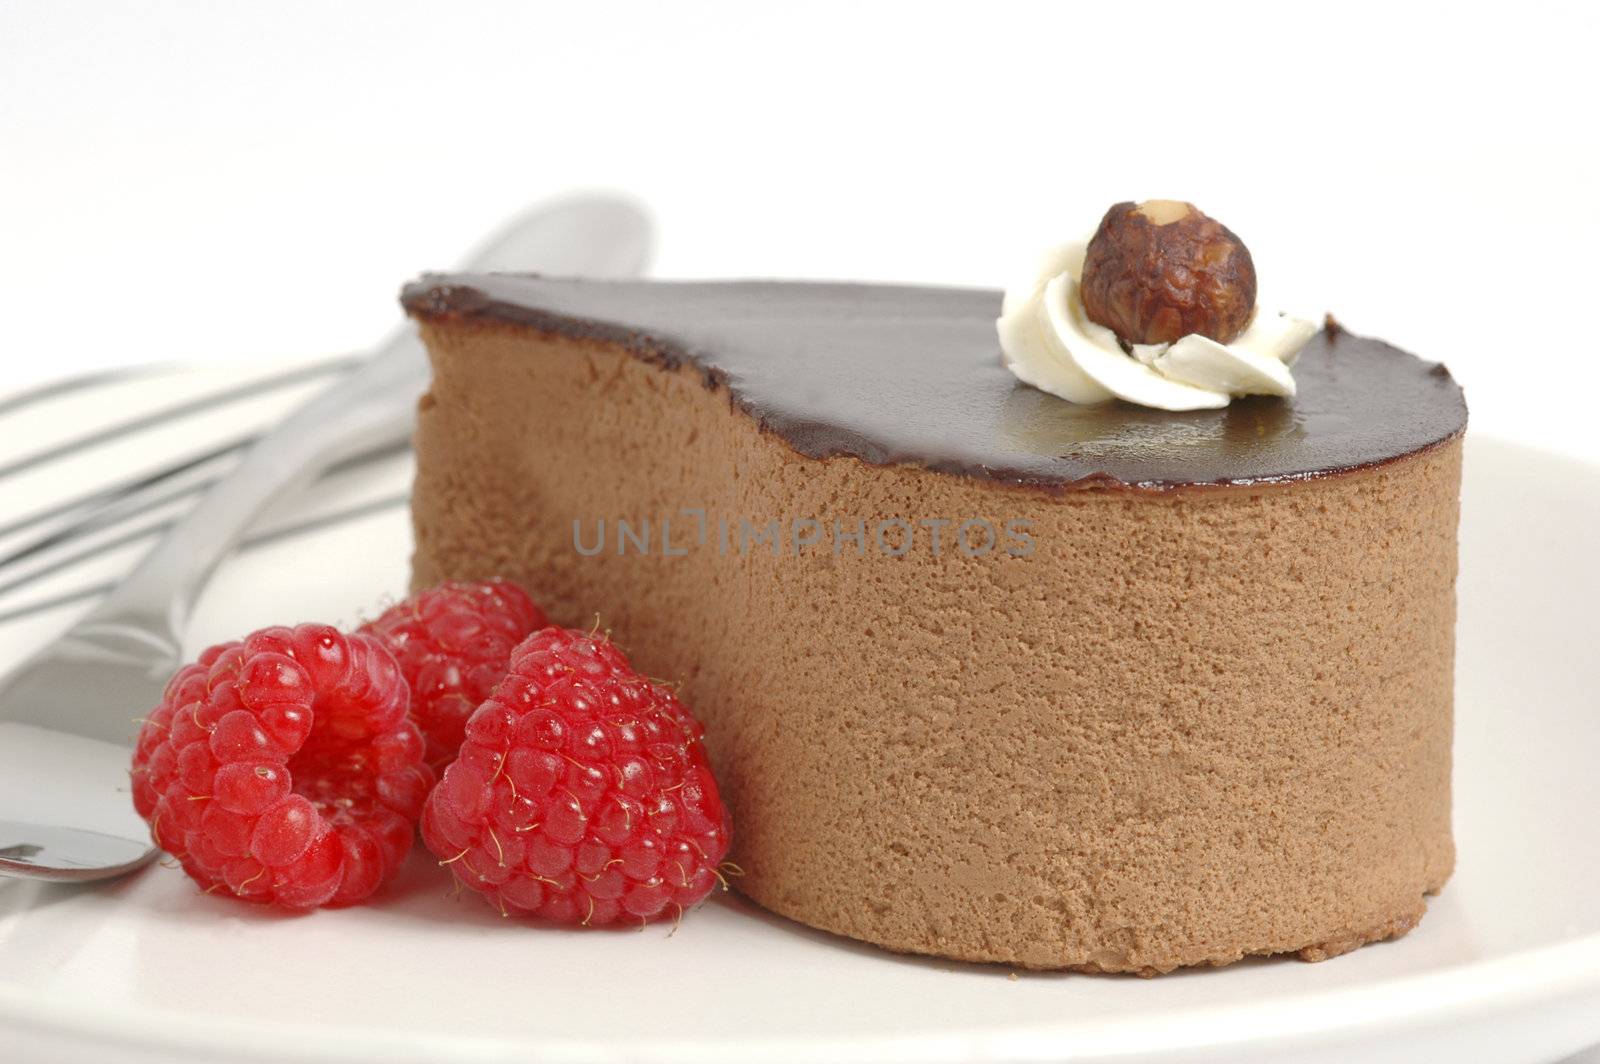 Chocolate mousse dessert served with raspberries.